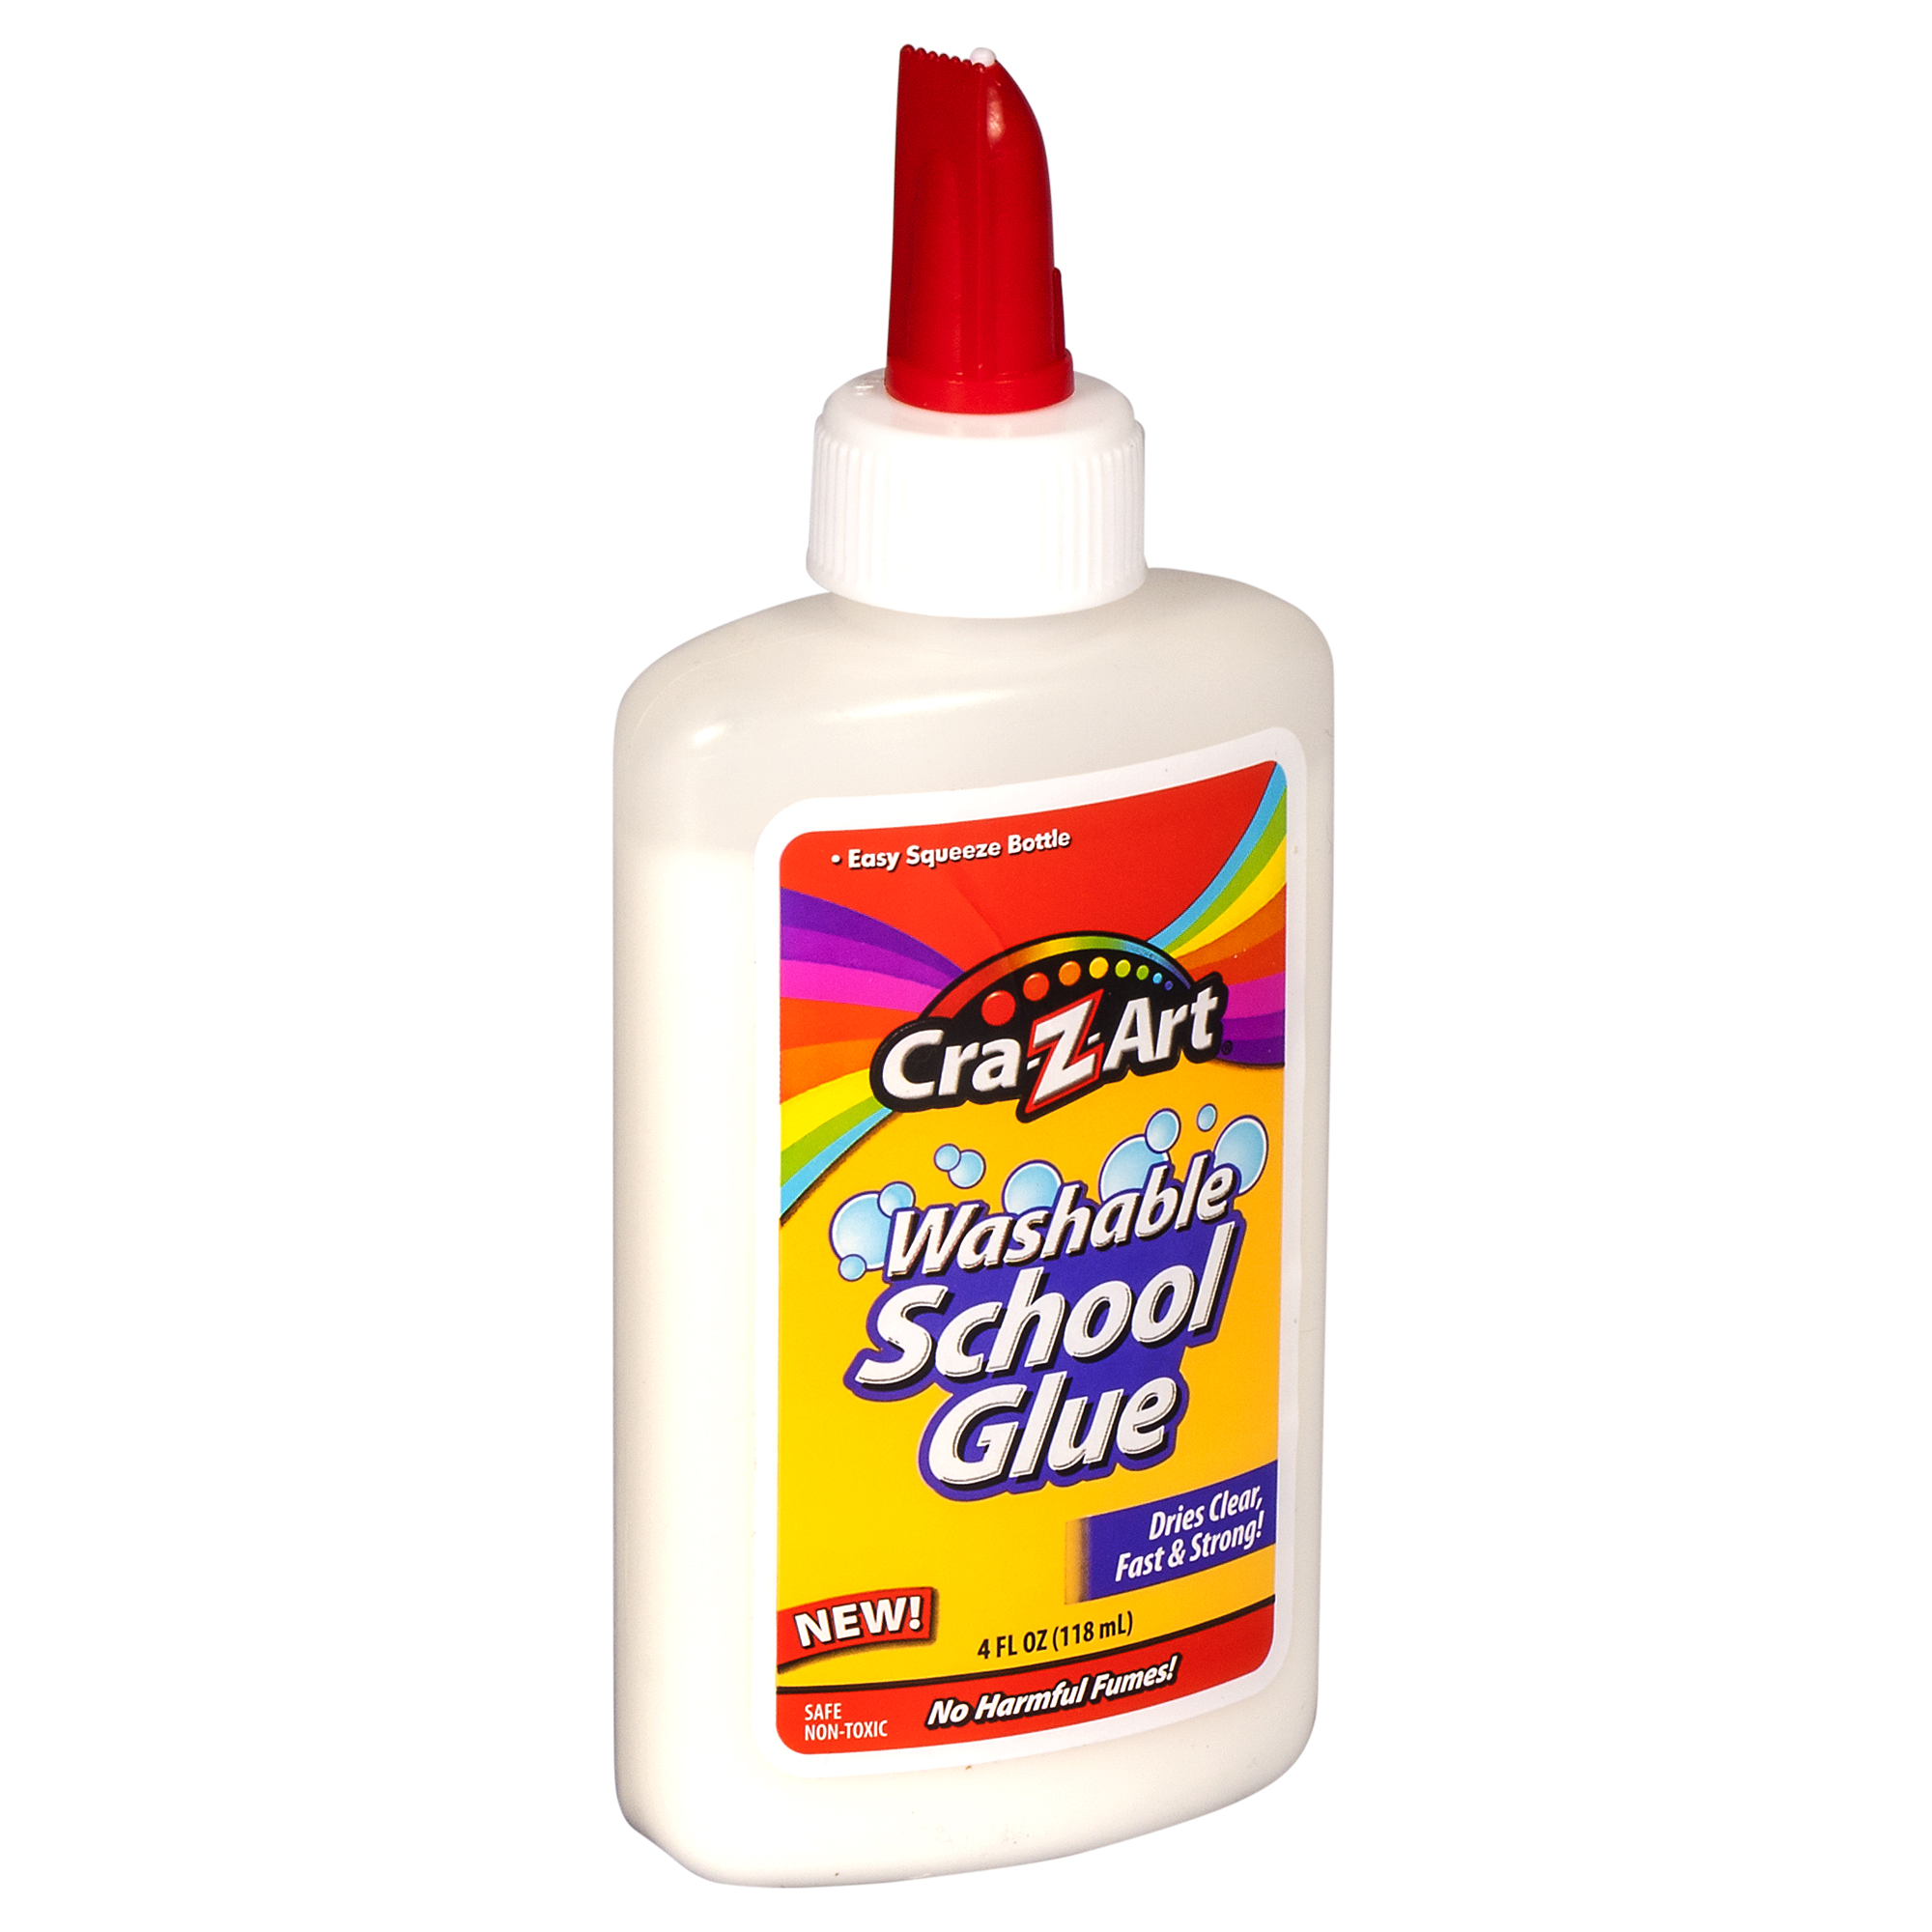 Cra-Z-Art Washable School Glue, 4oz White, Assembled Product Weight 0.4lb - image 5 of 9